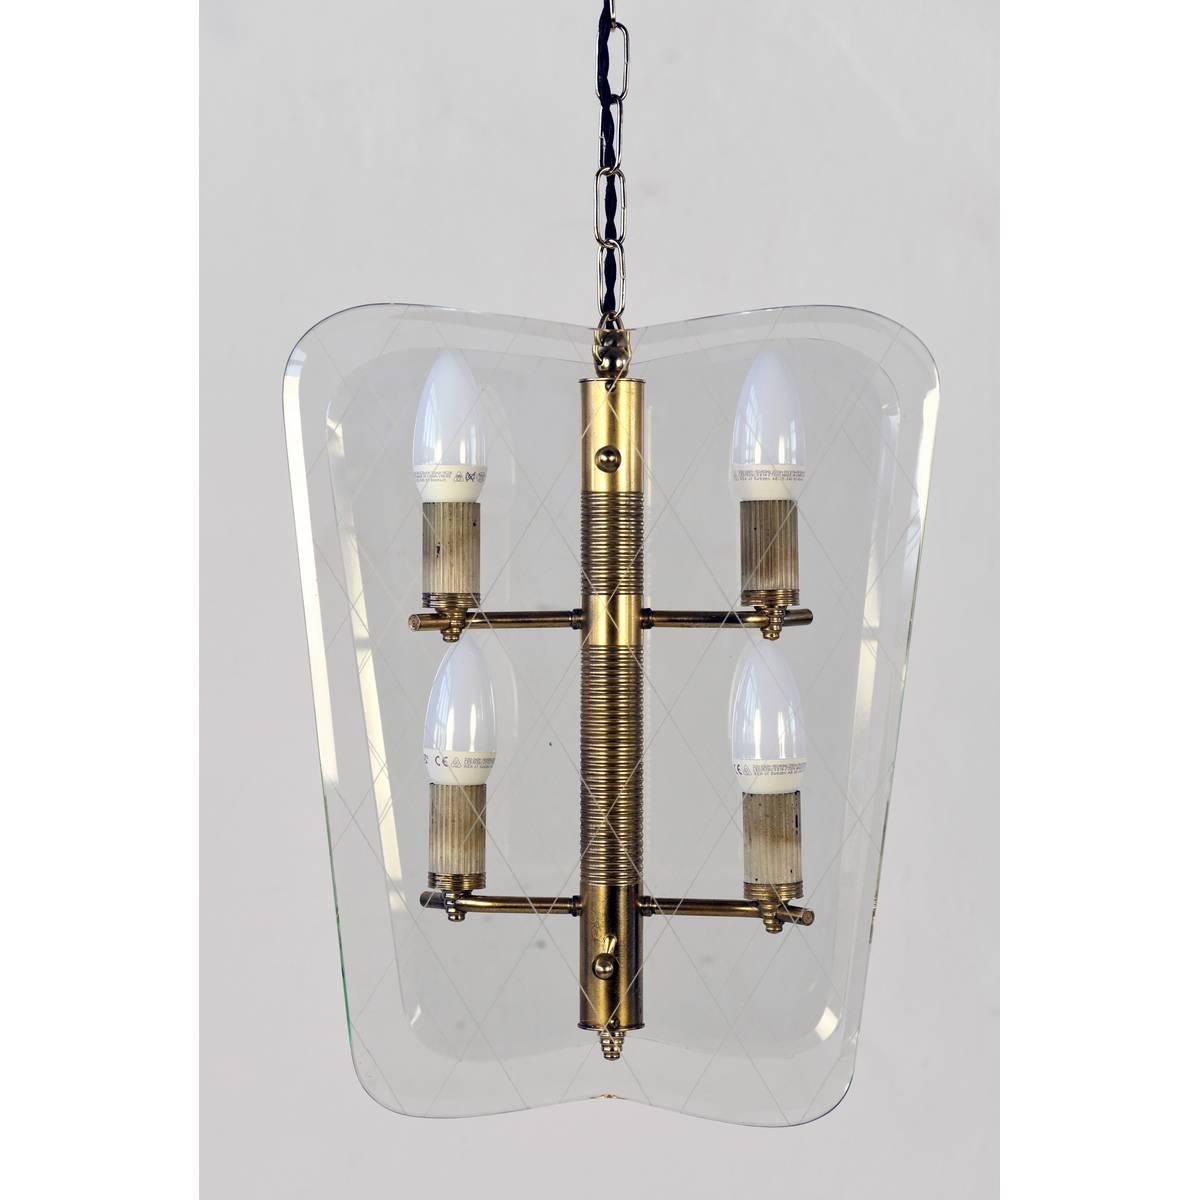 Recognizably high quality of the workmanship, this fine Italian pendant light is attributed to the Fontana Arte manufactory in Milan from the 1950s.